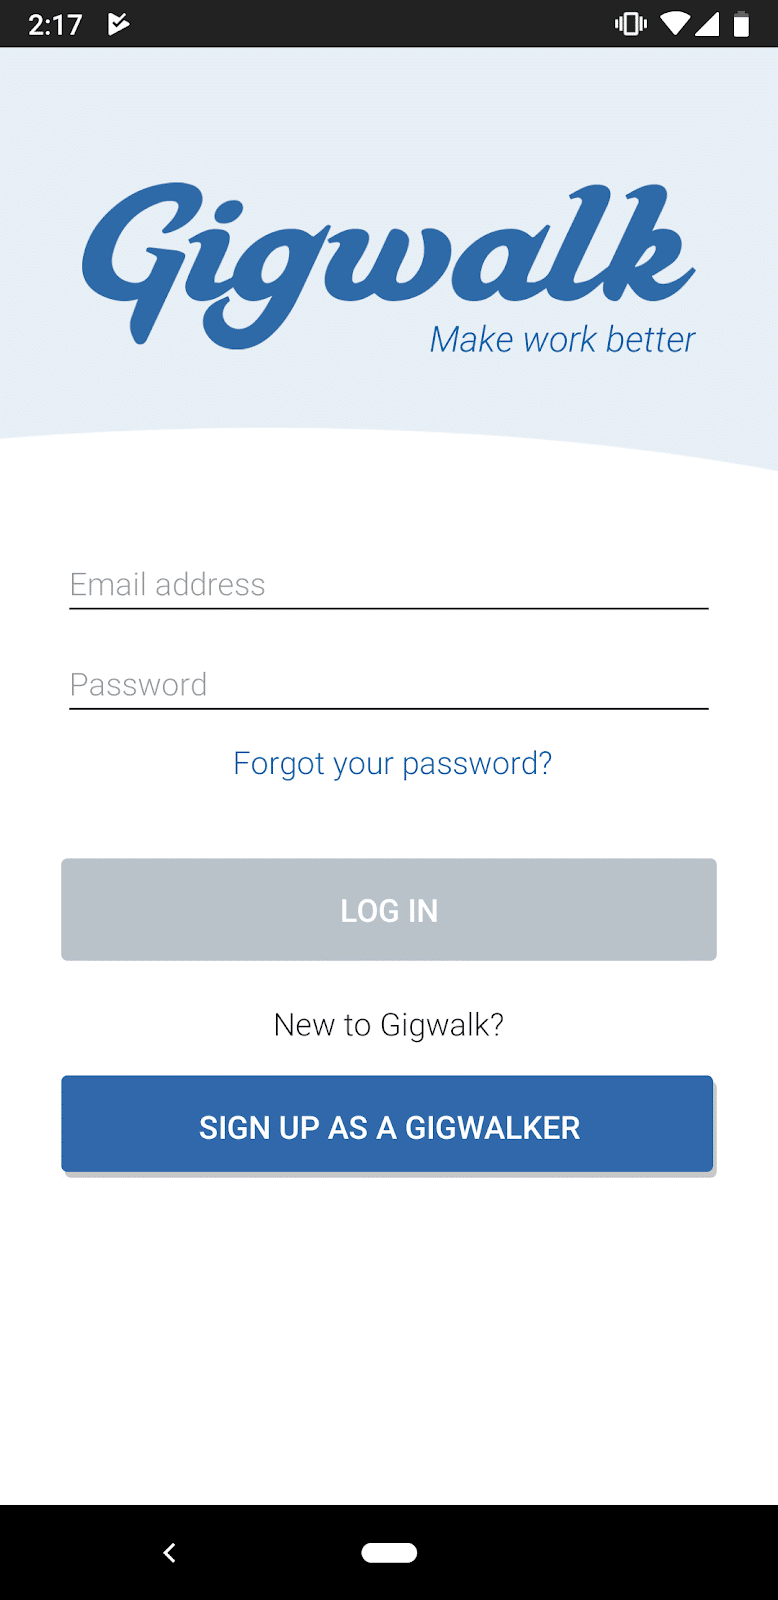 The Gigwalk signup page on the app